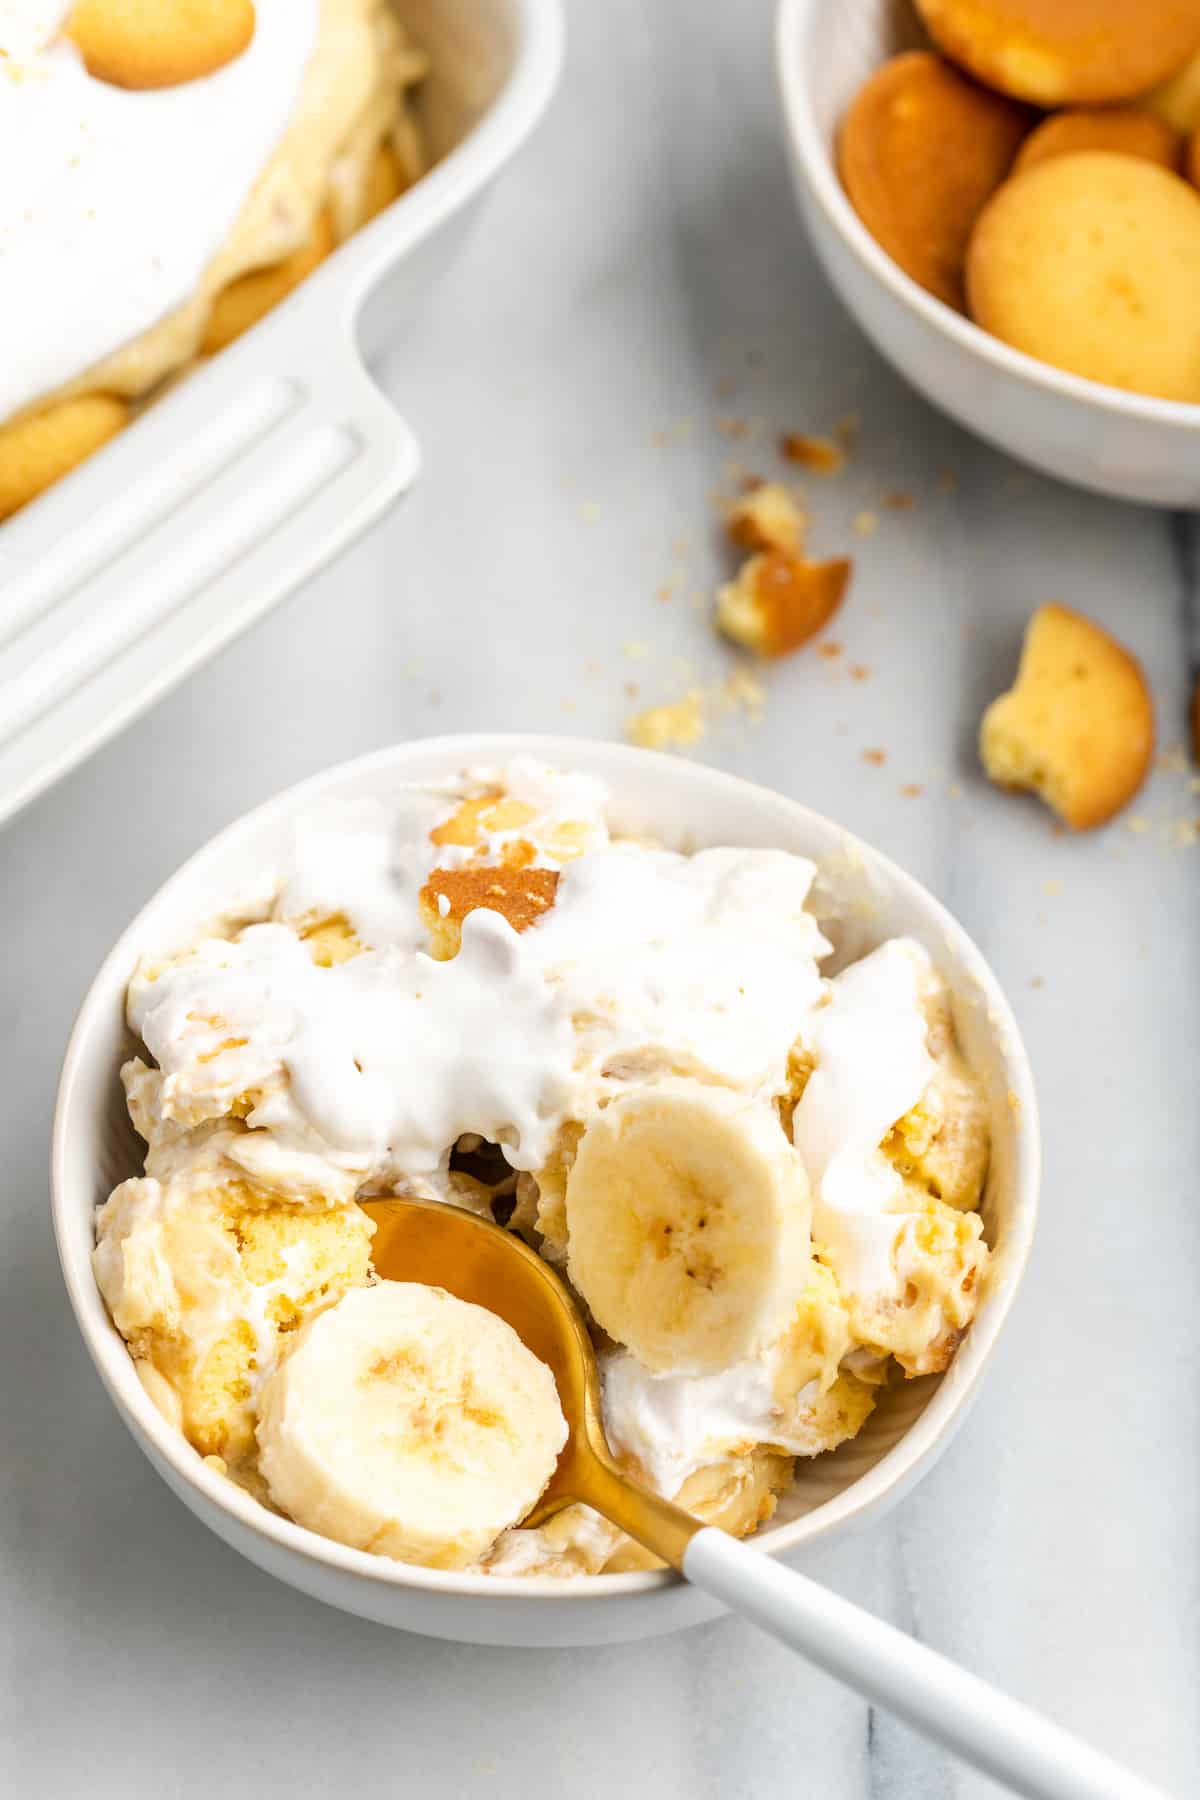 Bowl of vegan banana pudding with spoon digging in